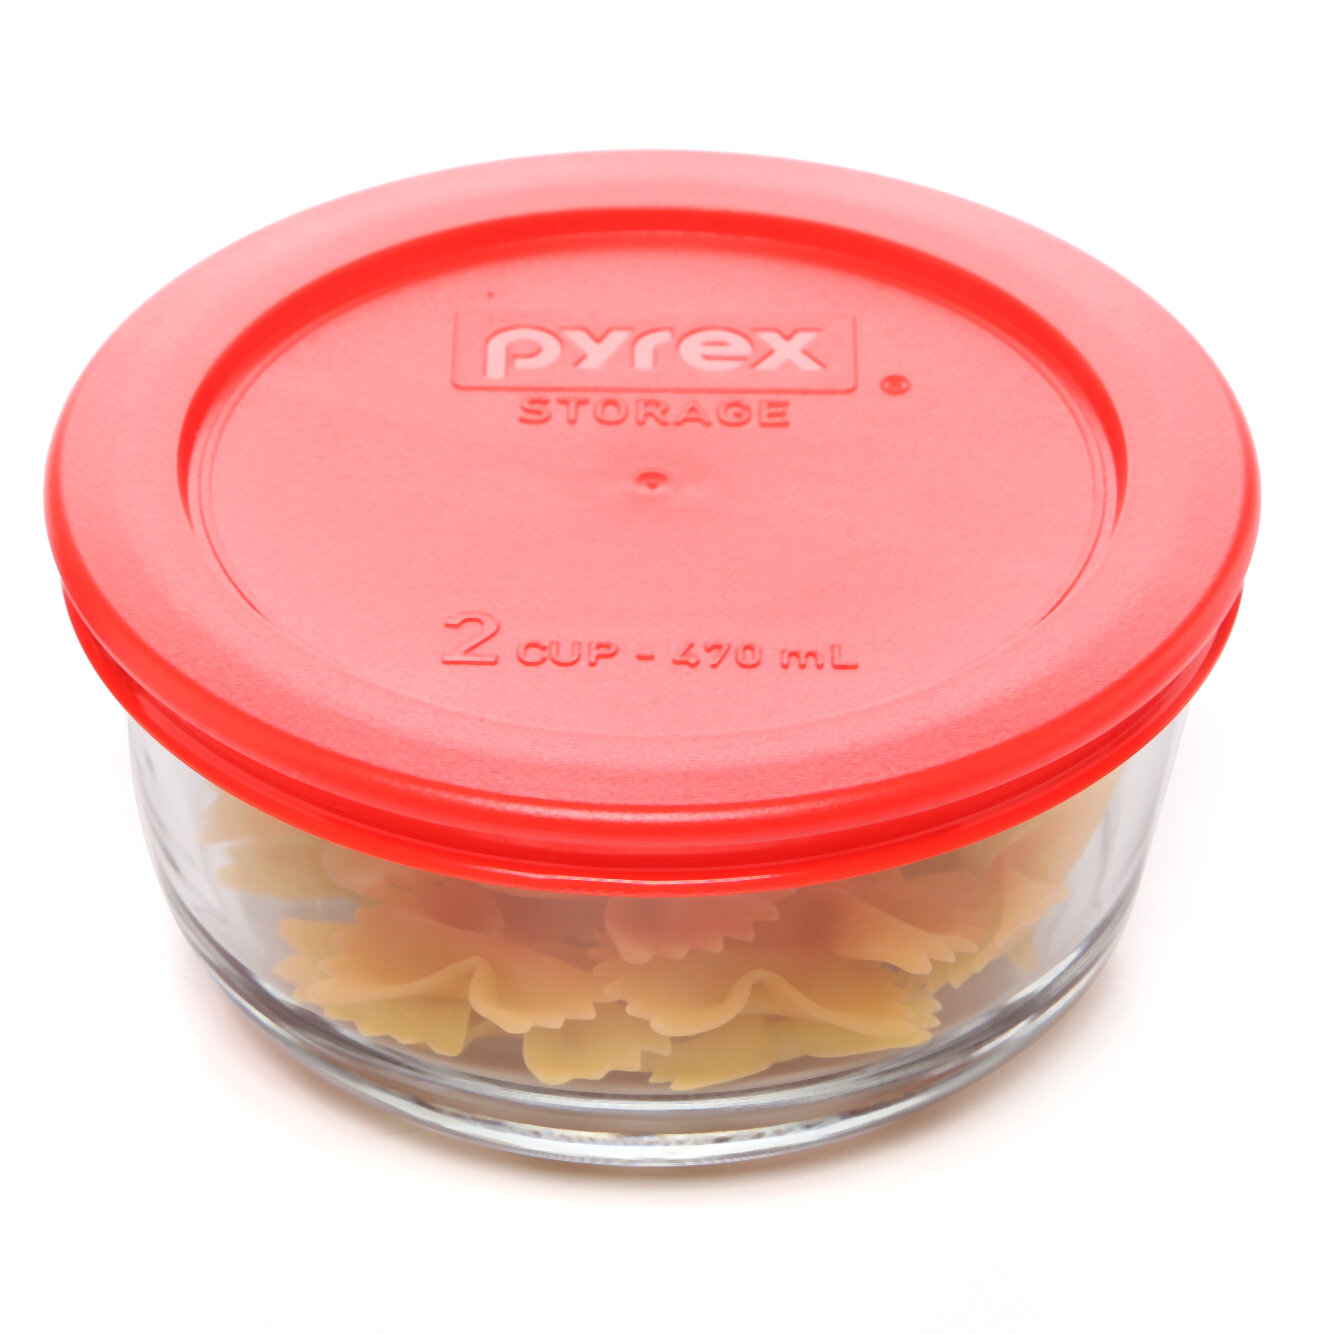 Pyrex Food Storage Container & Reviews